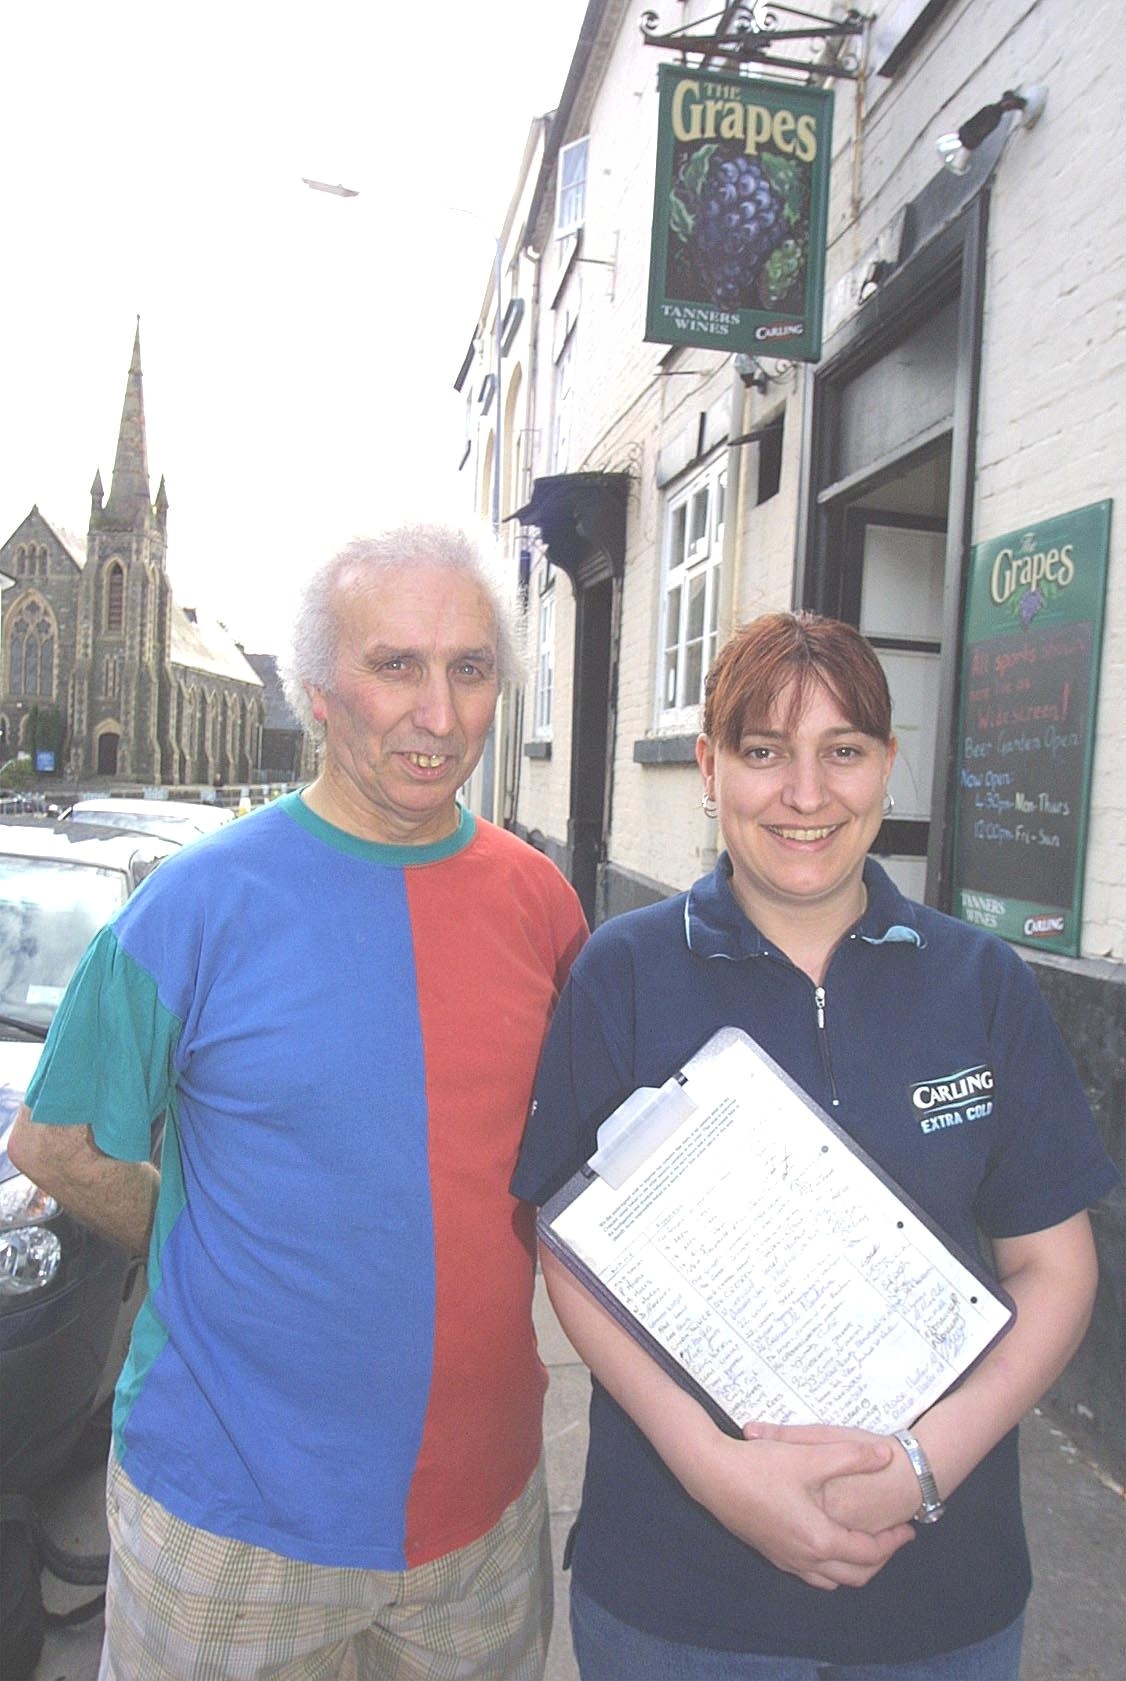 Philip Glynn and Helen Davies with a petition to get CCTV installed in the area.